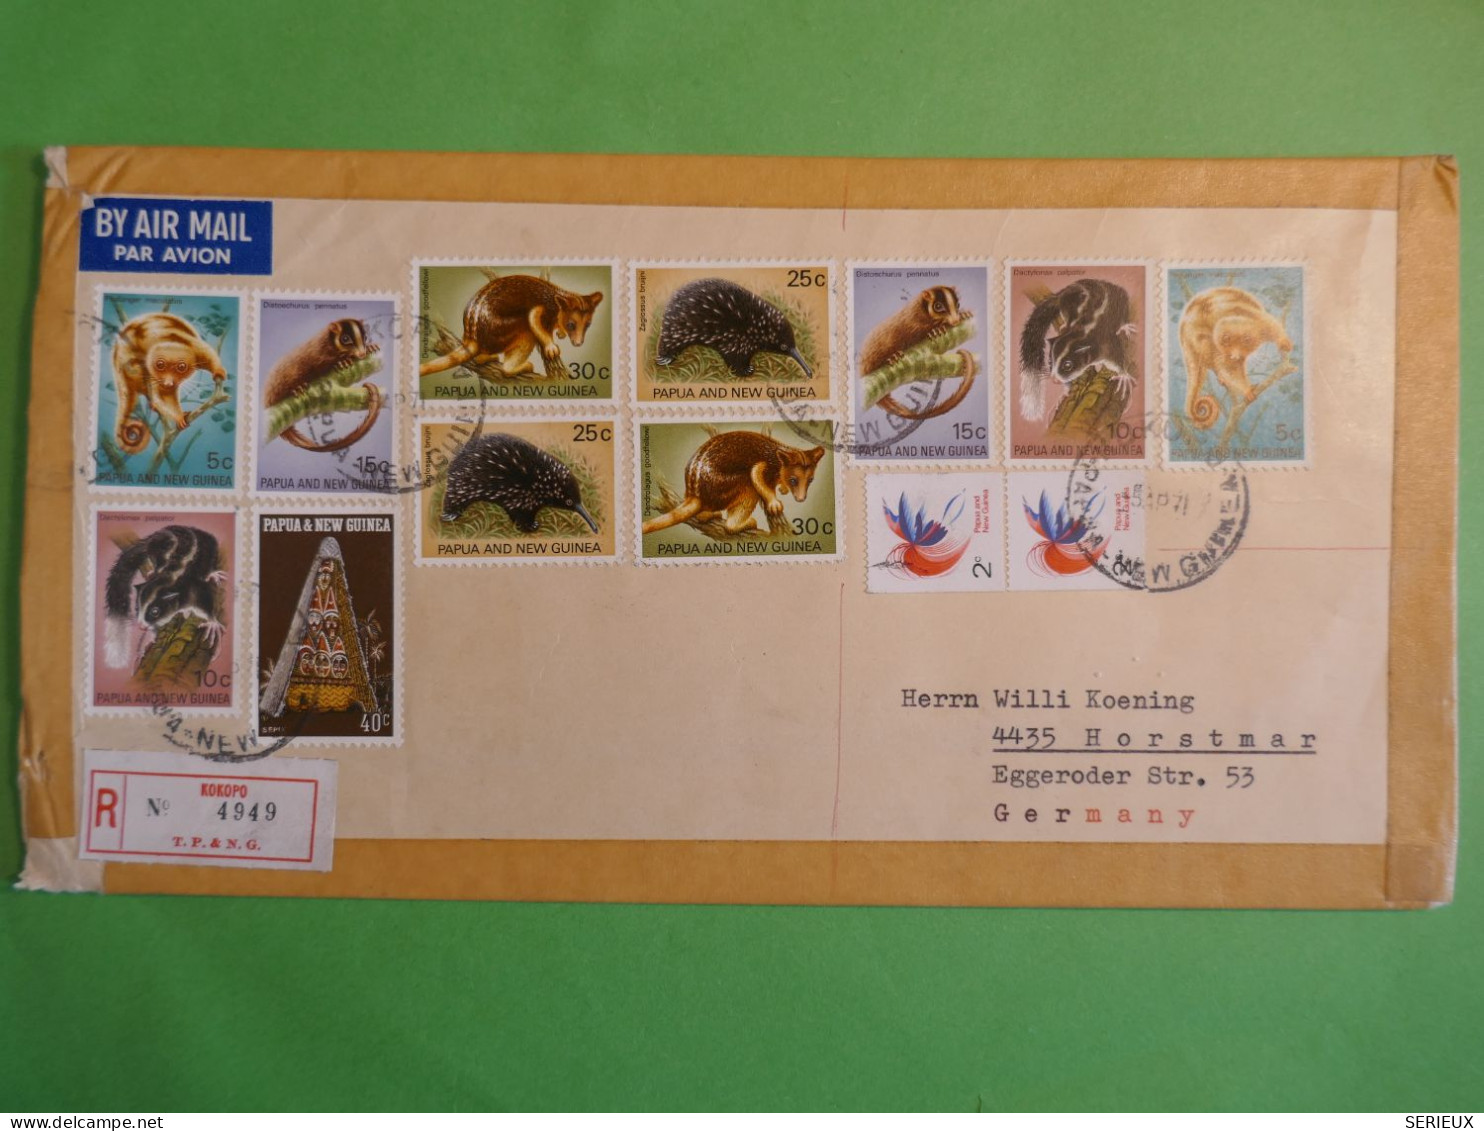 DO14 PAPOUASIE . PAPUA NEW GUINEA  RARE FINE LETTER  1971  ROKOPO  A  ROTSMAR  GERMANY +ANIMALS   + AFF. GREAT +++++ - Papua-Neuguinea